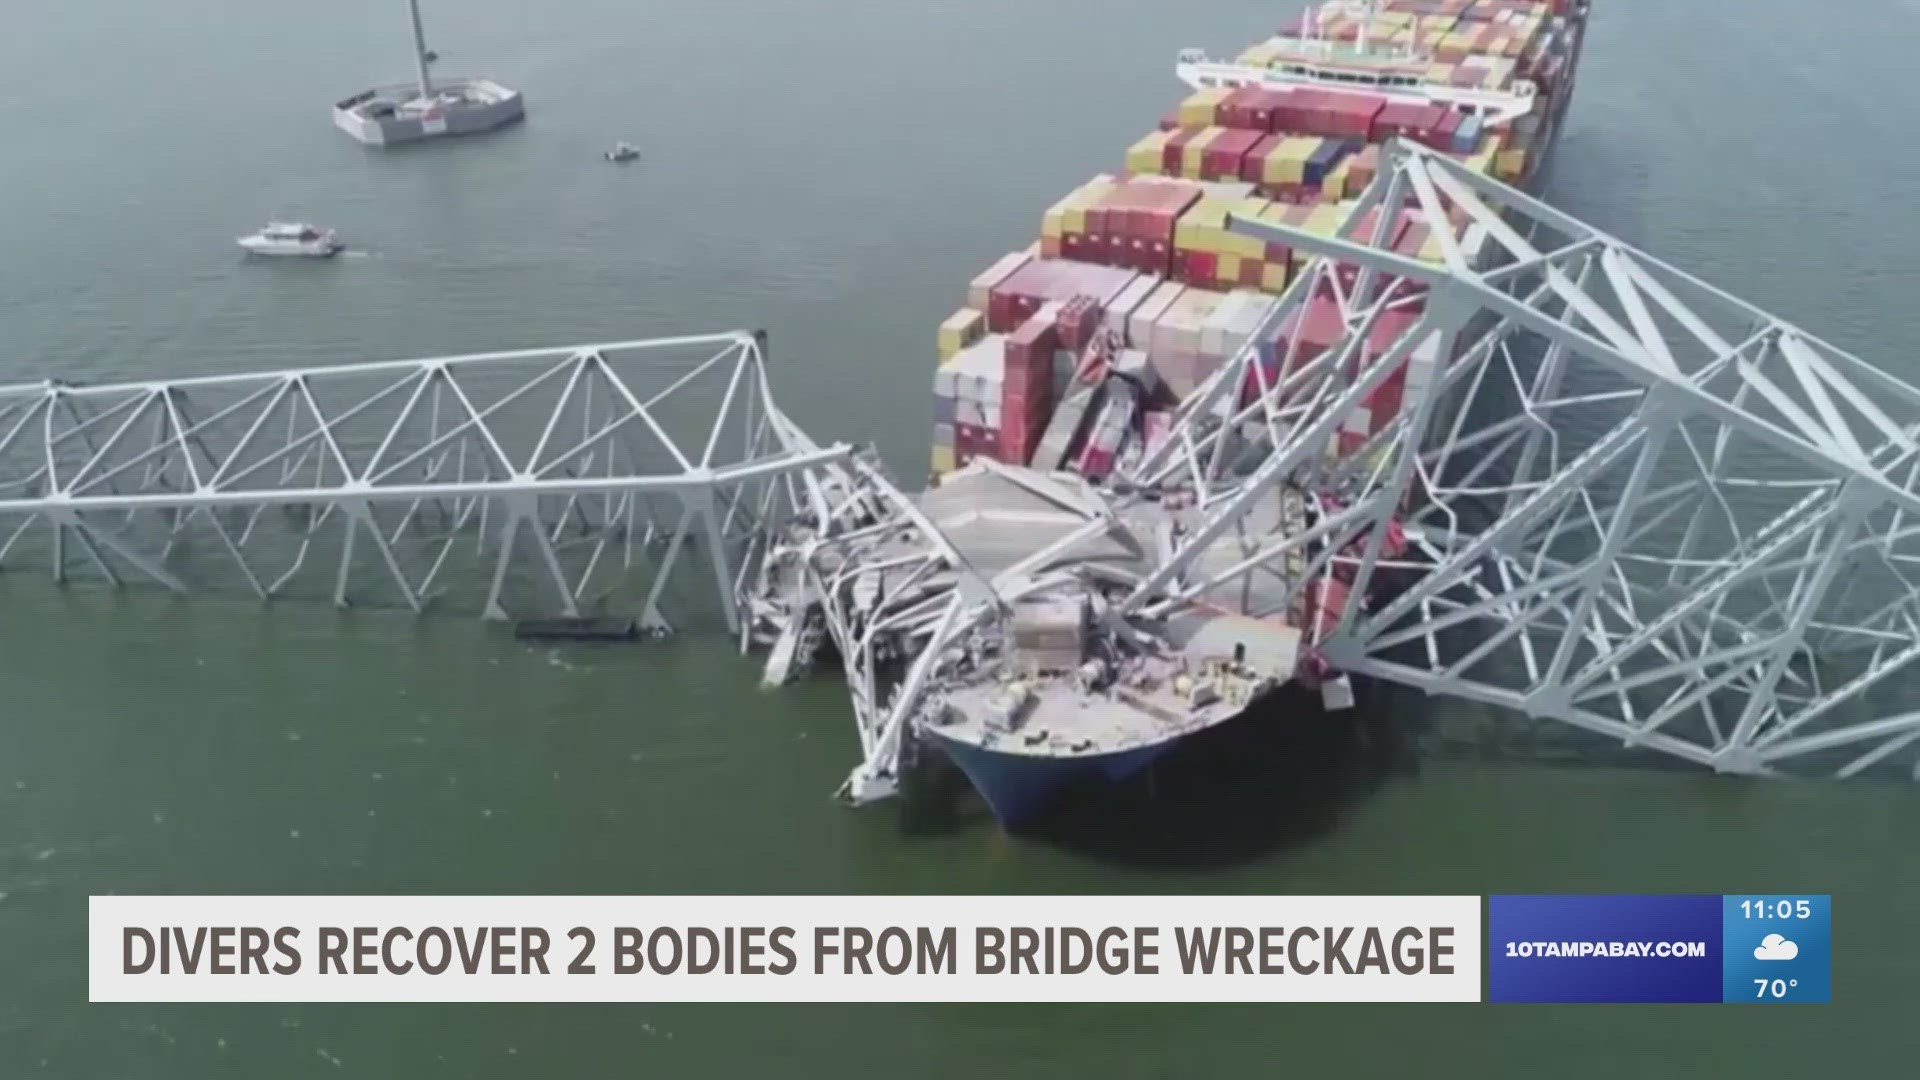 The bodies of the two men, ages 35 and 26, were located by divers inside a red pickup submerged in about 25 feet of water near the bridge’s middle span.